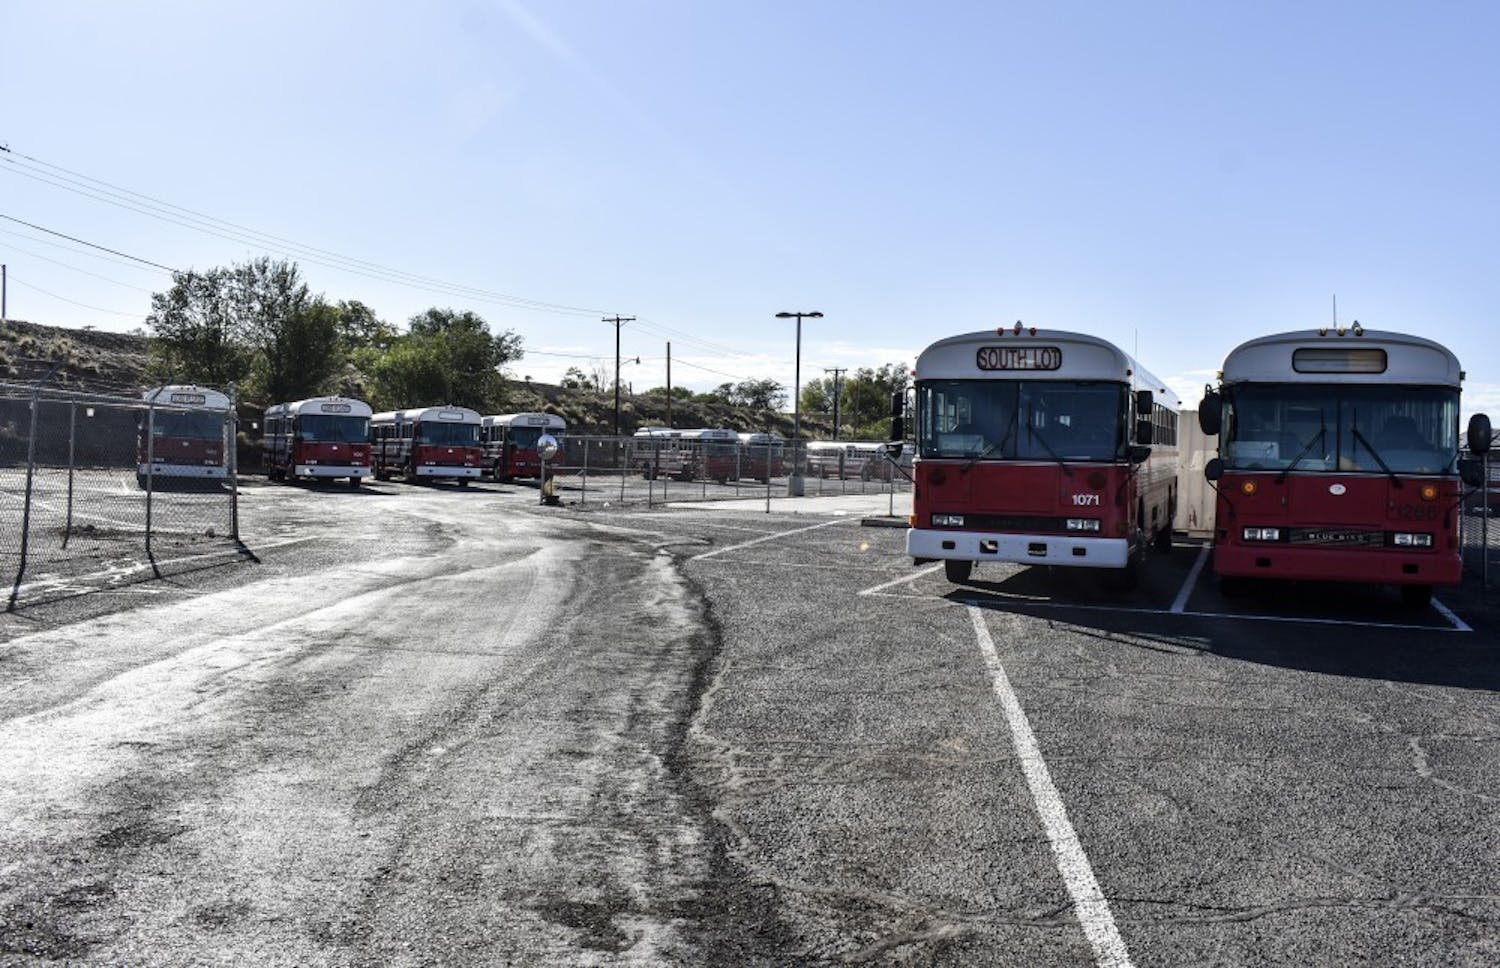 South Lot and Lobo Village shuttles wait to be used in T-lot.